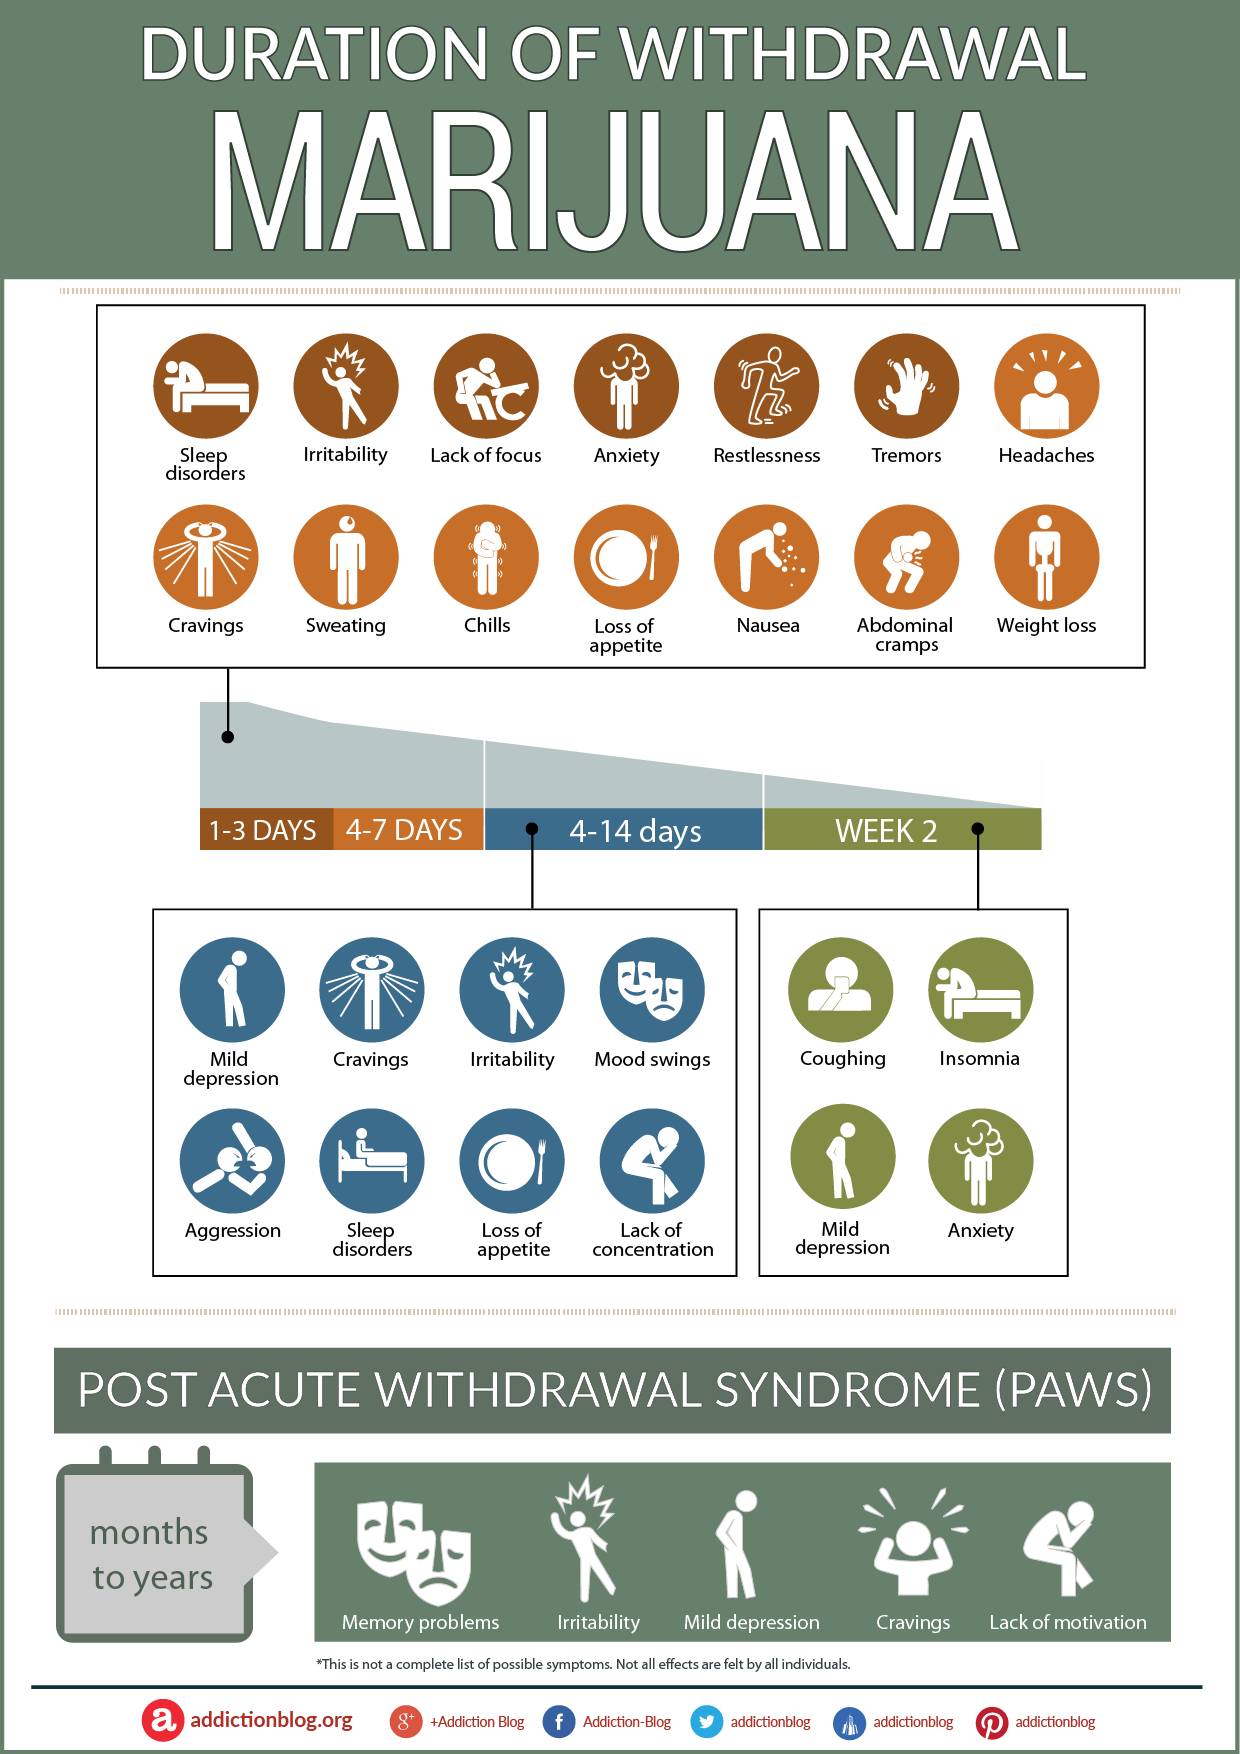 Marijuana Withdrawal Timeline and Symptoms Duration [INFOGRAPHIC]